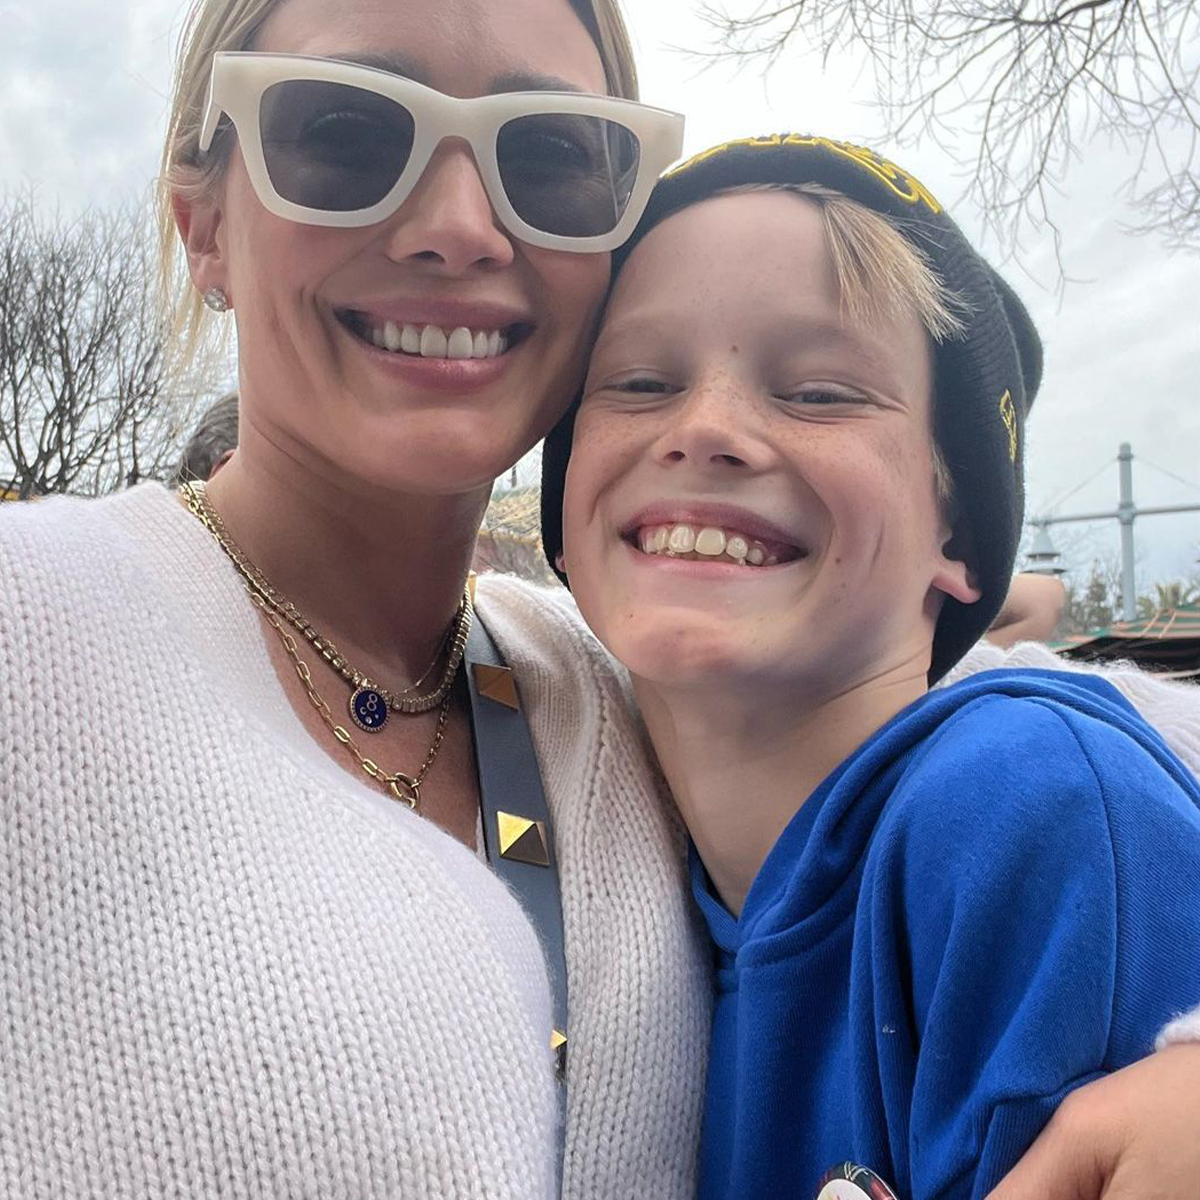 Hilary Duff’s Son Luca Comrie Is All Grown Up in Rare London Outing